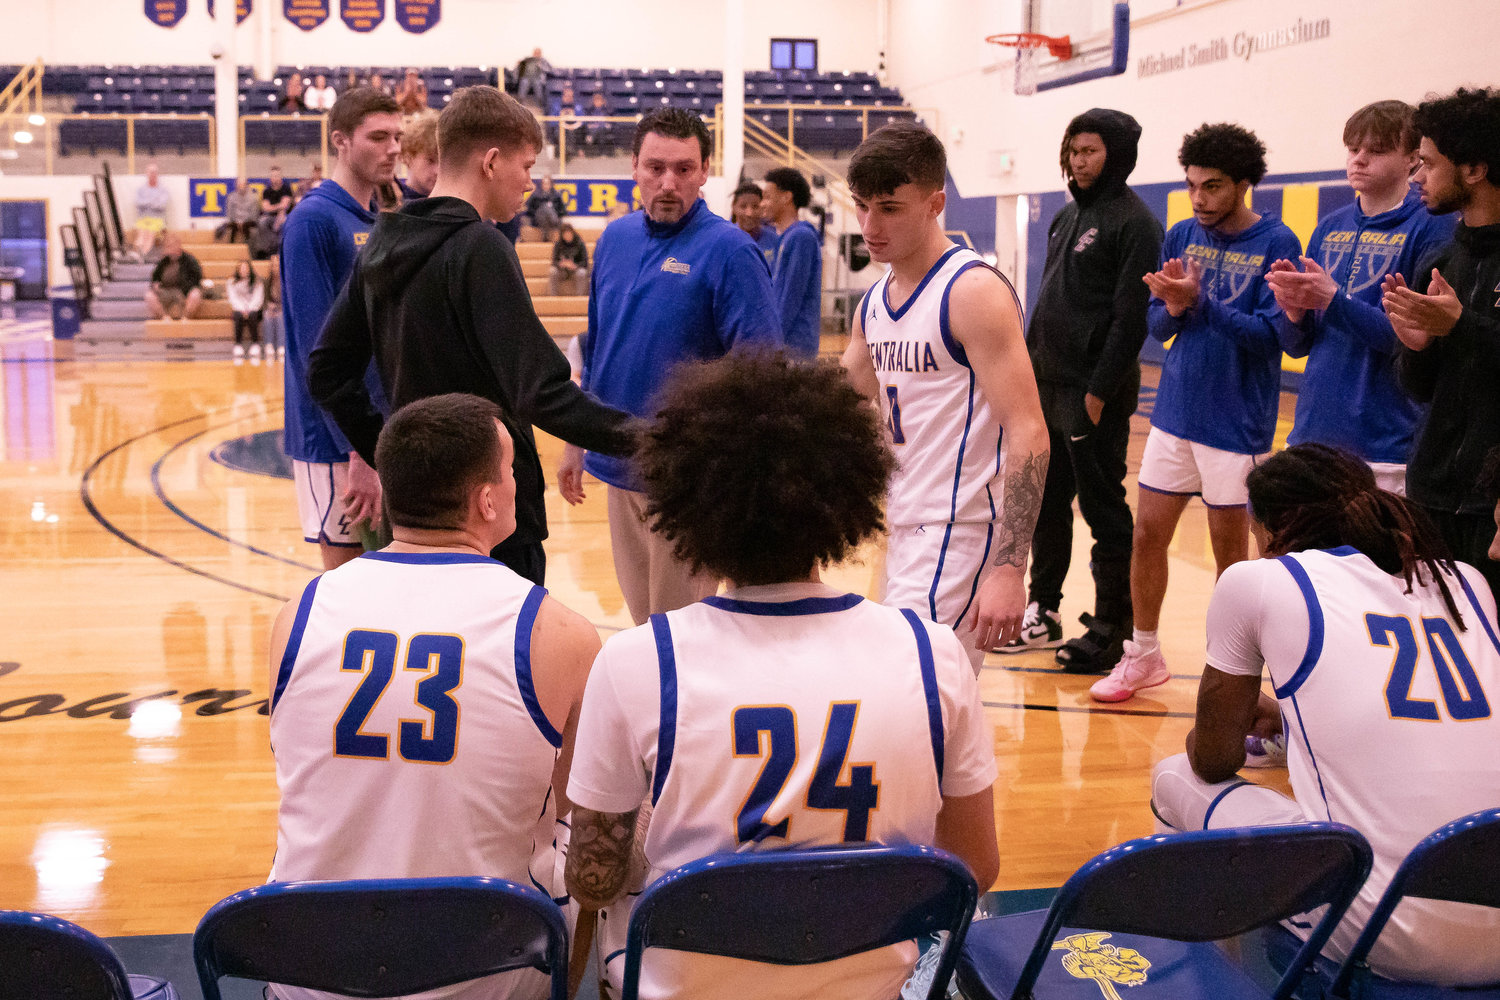 Centralia College men's basketball gets set for its game against South Puget Sound Jan. 14 at Michael Smith Gym.